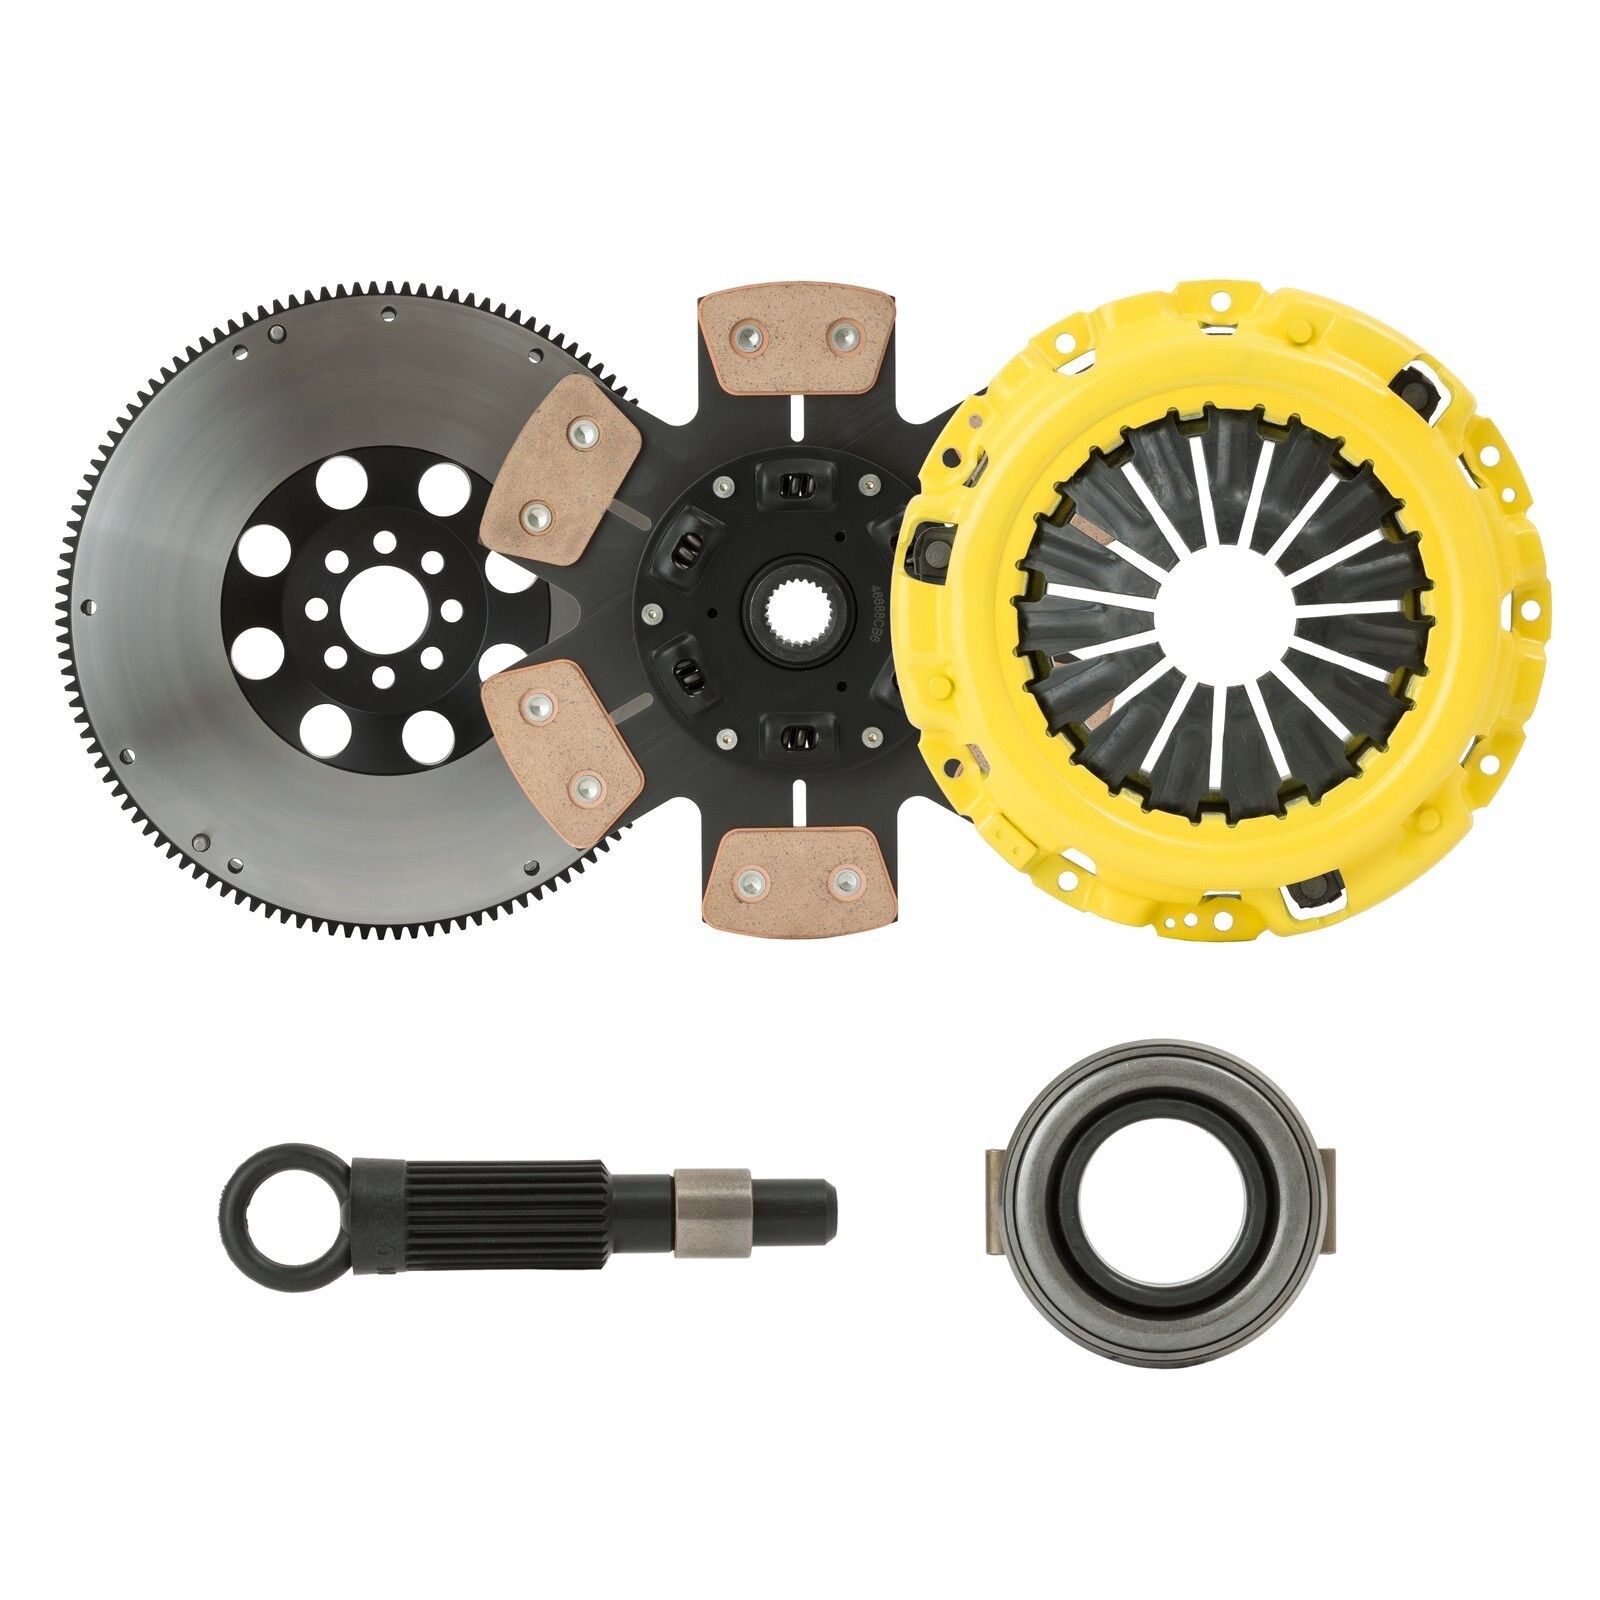 STAGE 3 RACING CLUTCH KIT+FLYWHEEL fits 1994-2001 ACURA INTEGRA by CLUTCHXPERTS